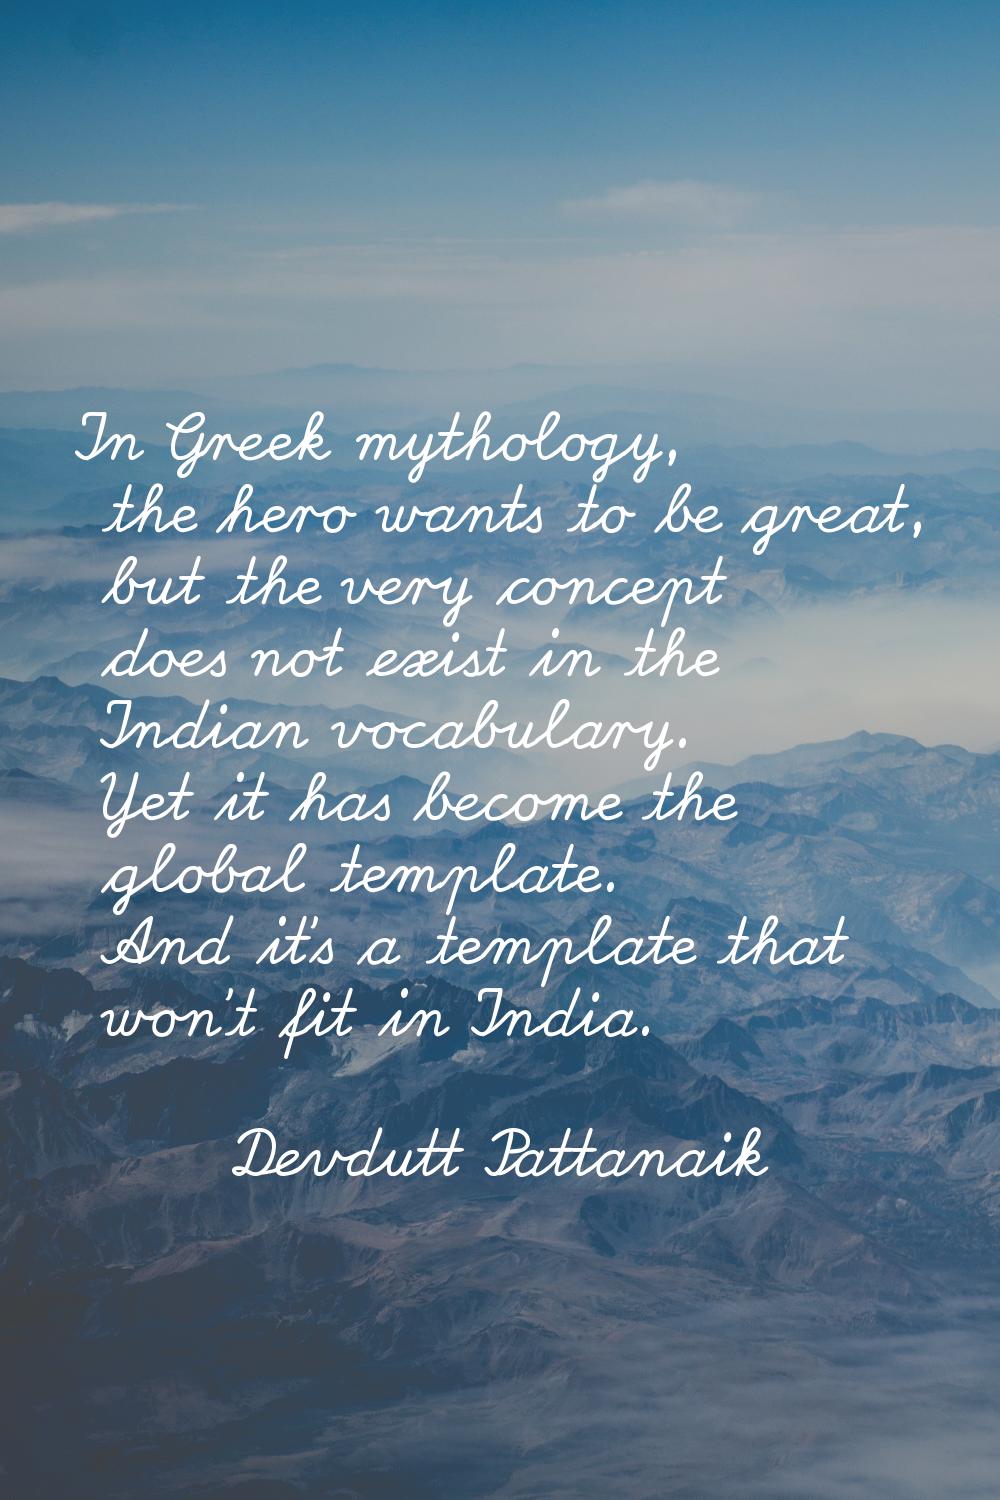 In Greek mythology, the hero wants to be great, but the very concept does not exist in the Indian v